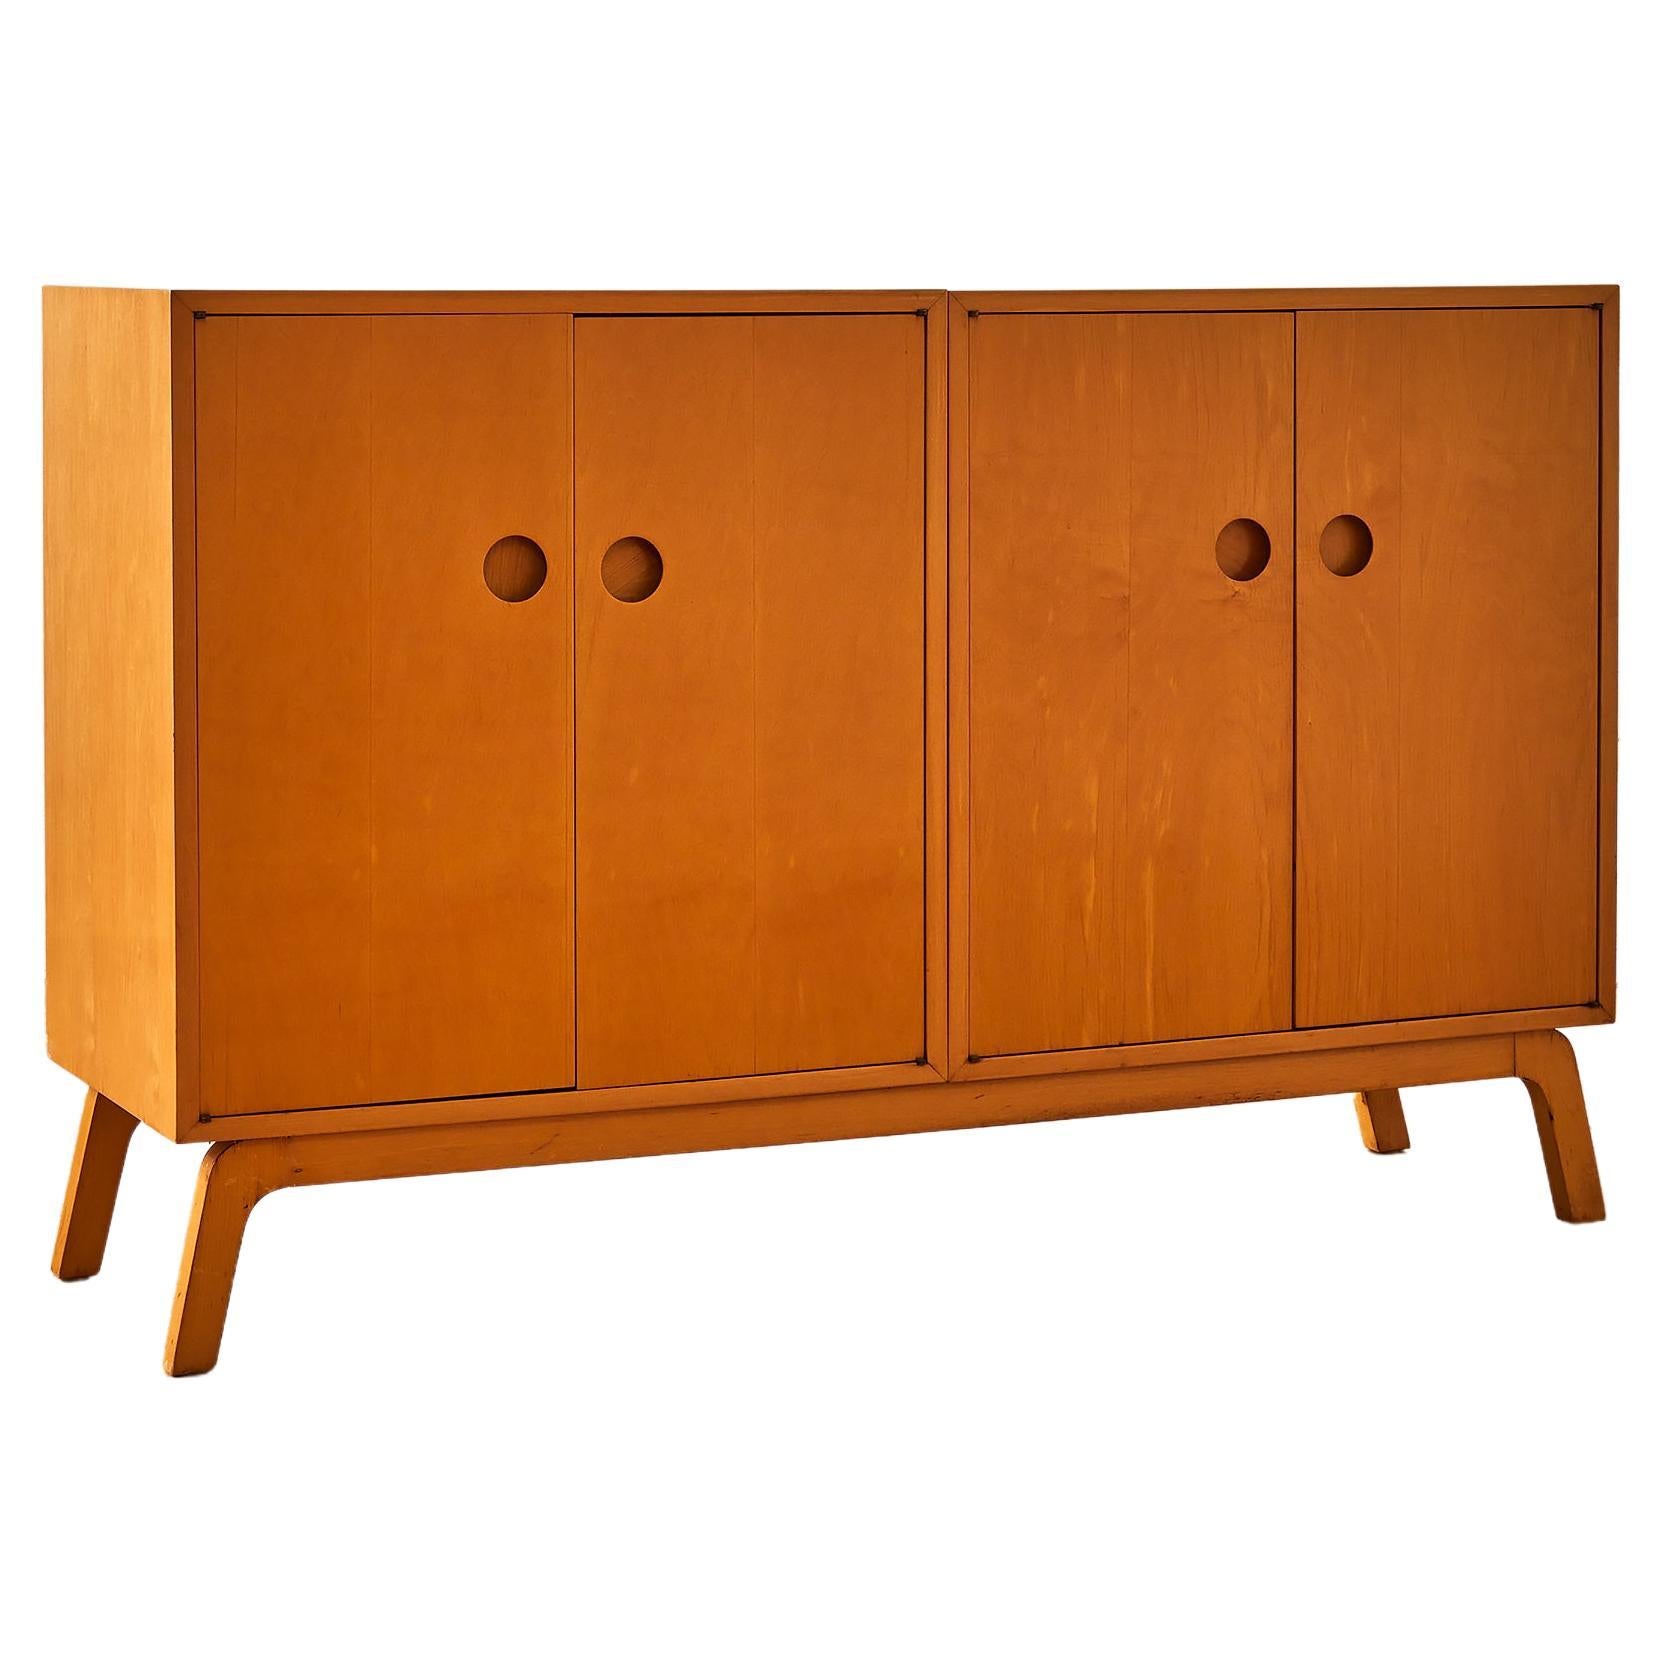 Sideboard by Clifford Pascoe for Artek